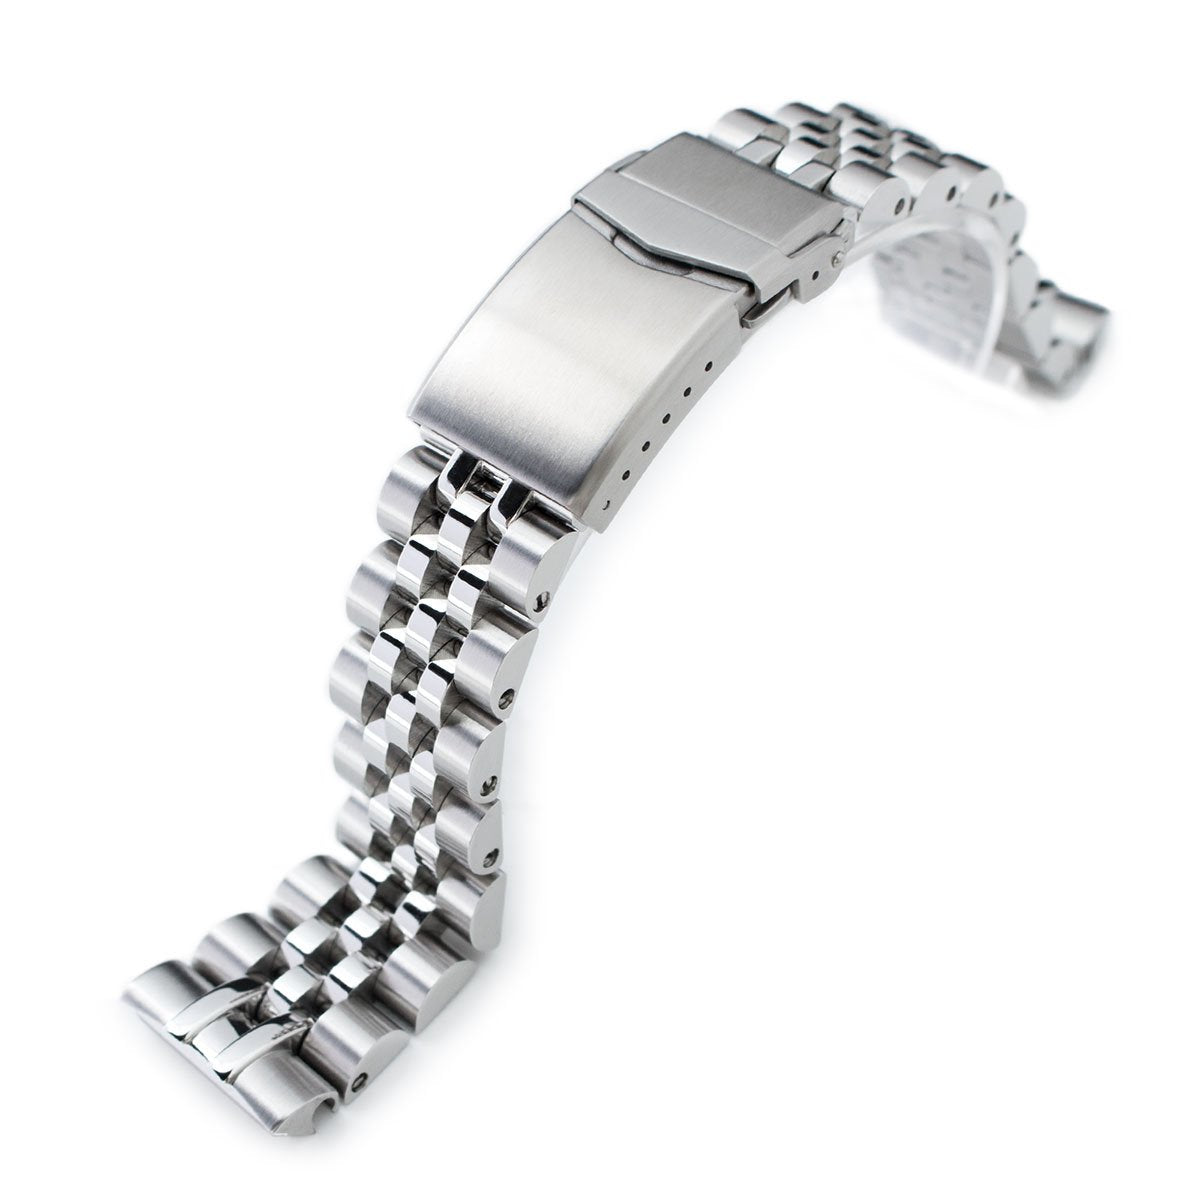 Jubilee Bracelet For Seiko Turtle Top Sellers, SAVE 31